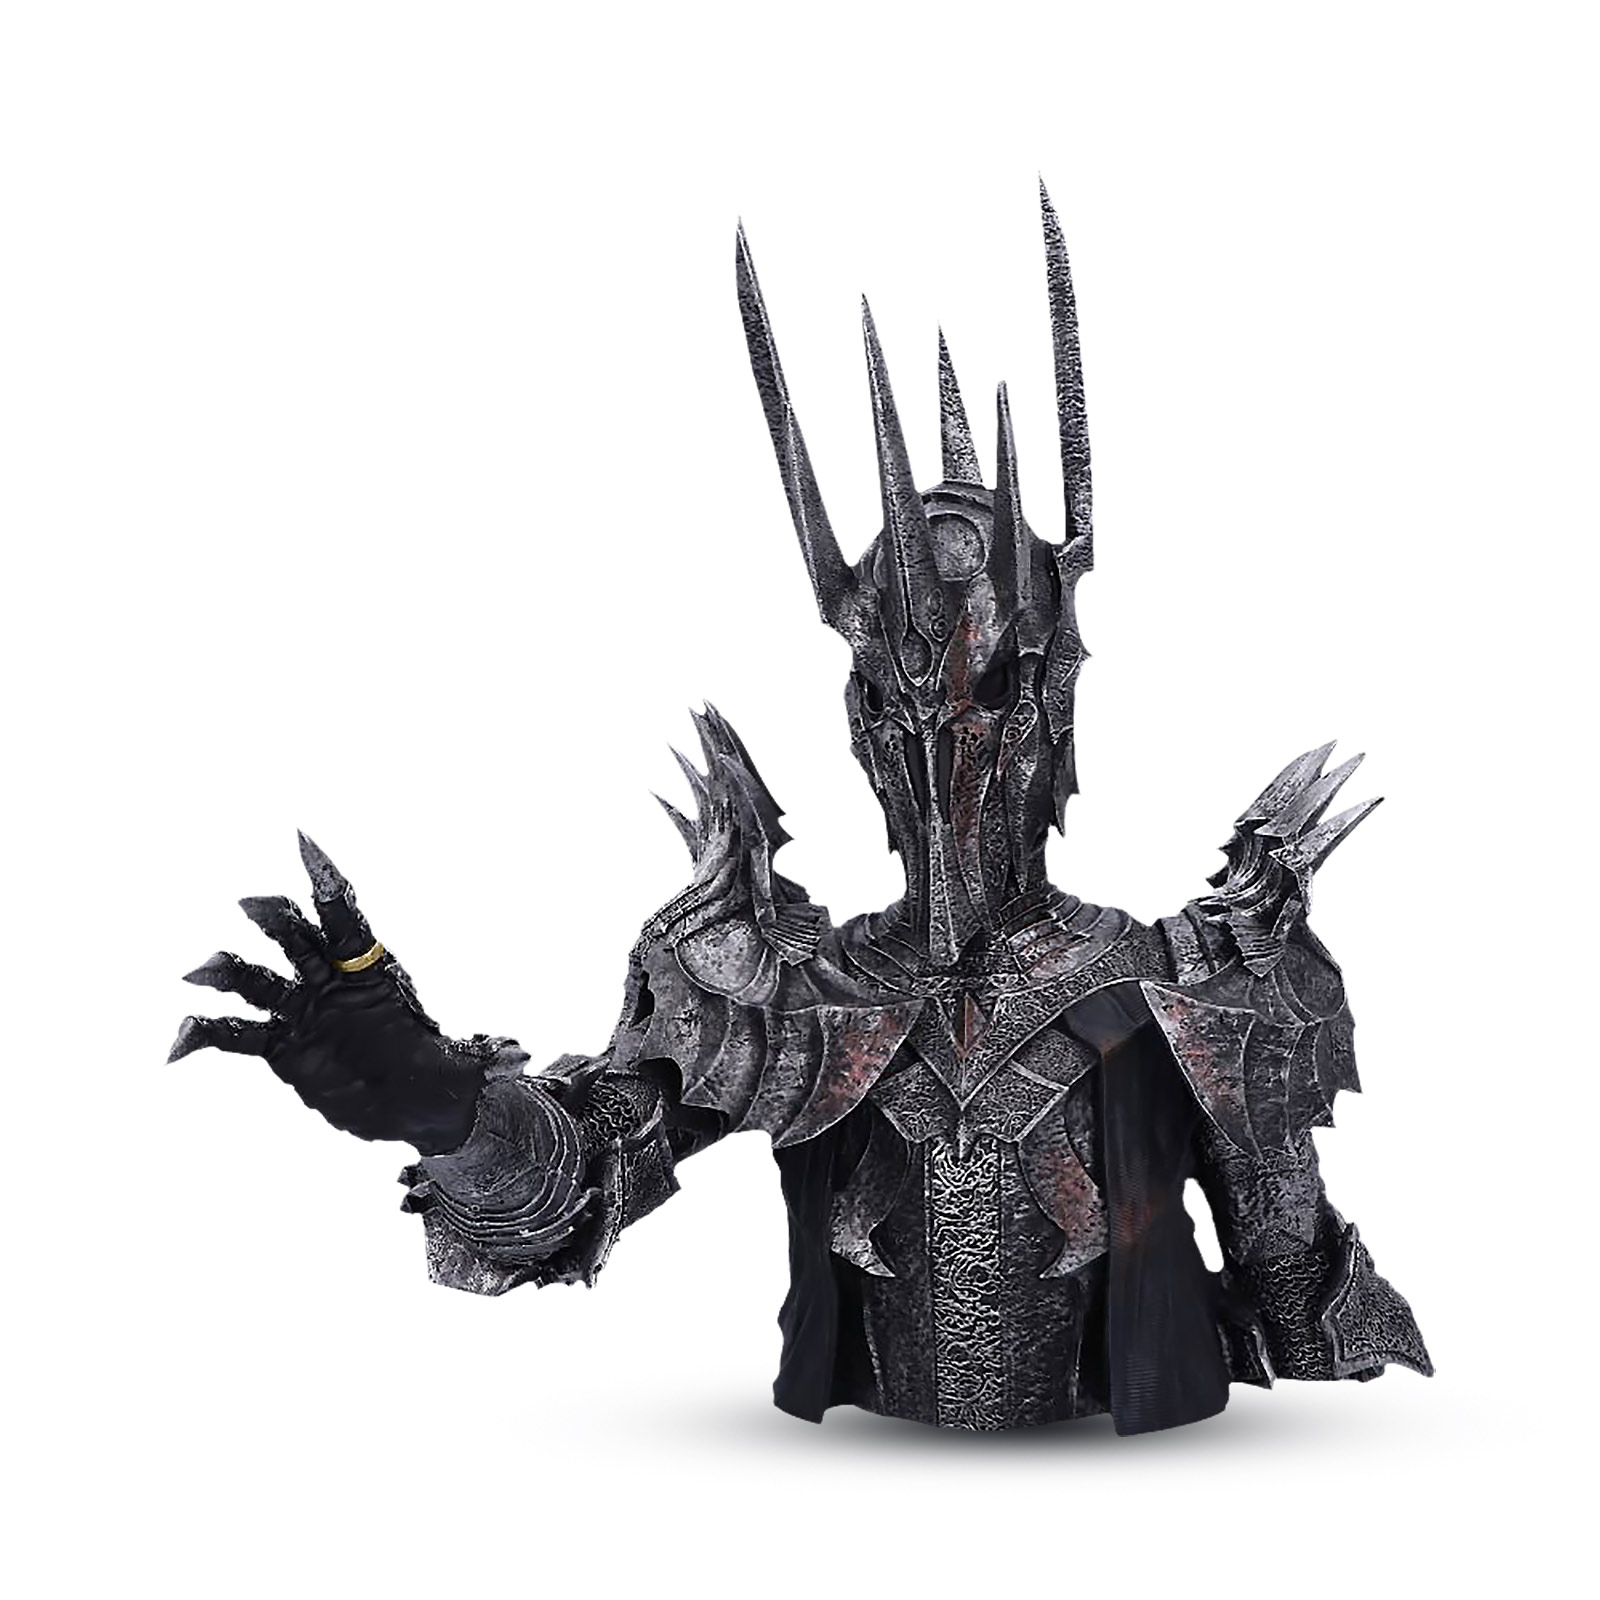 Lord of the Rings - Sauron Bust deluxe